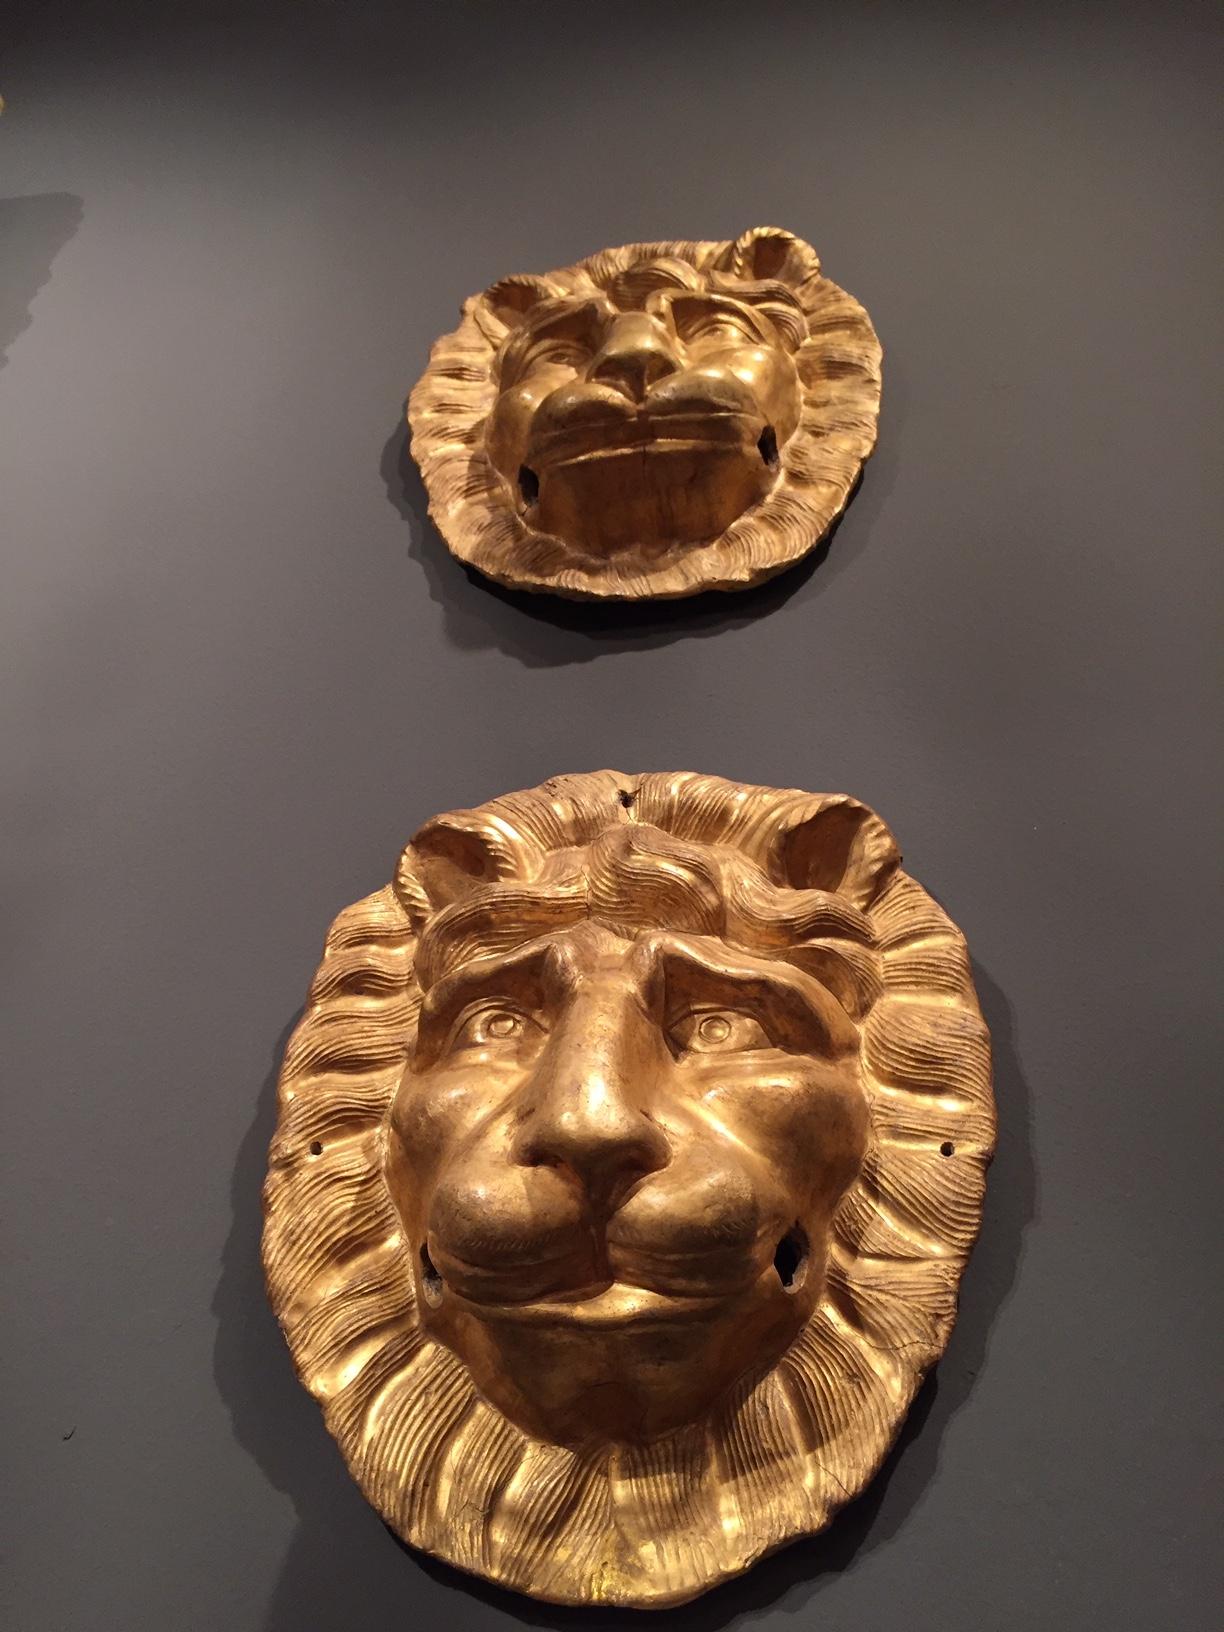 Paper Mid-19th Century Pair of Italian Masks Gilded Lion Head Sculptures from Tuscany